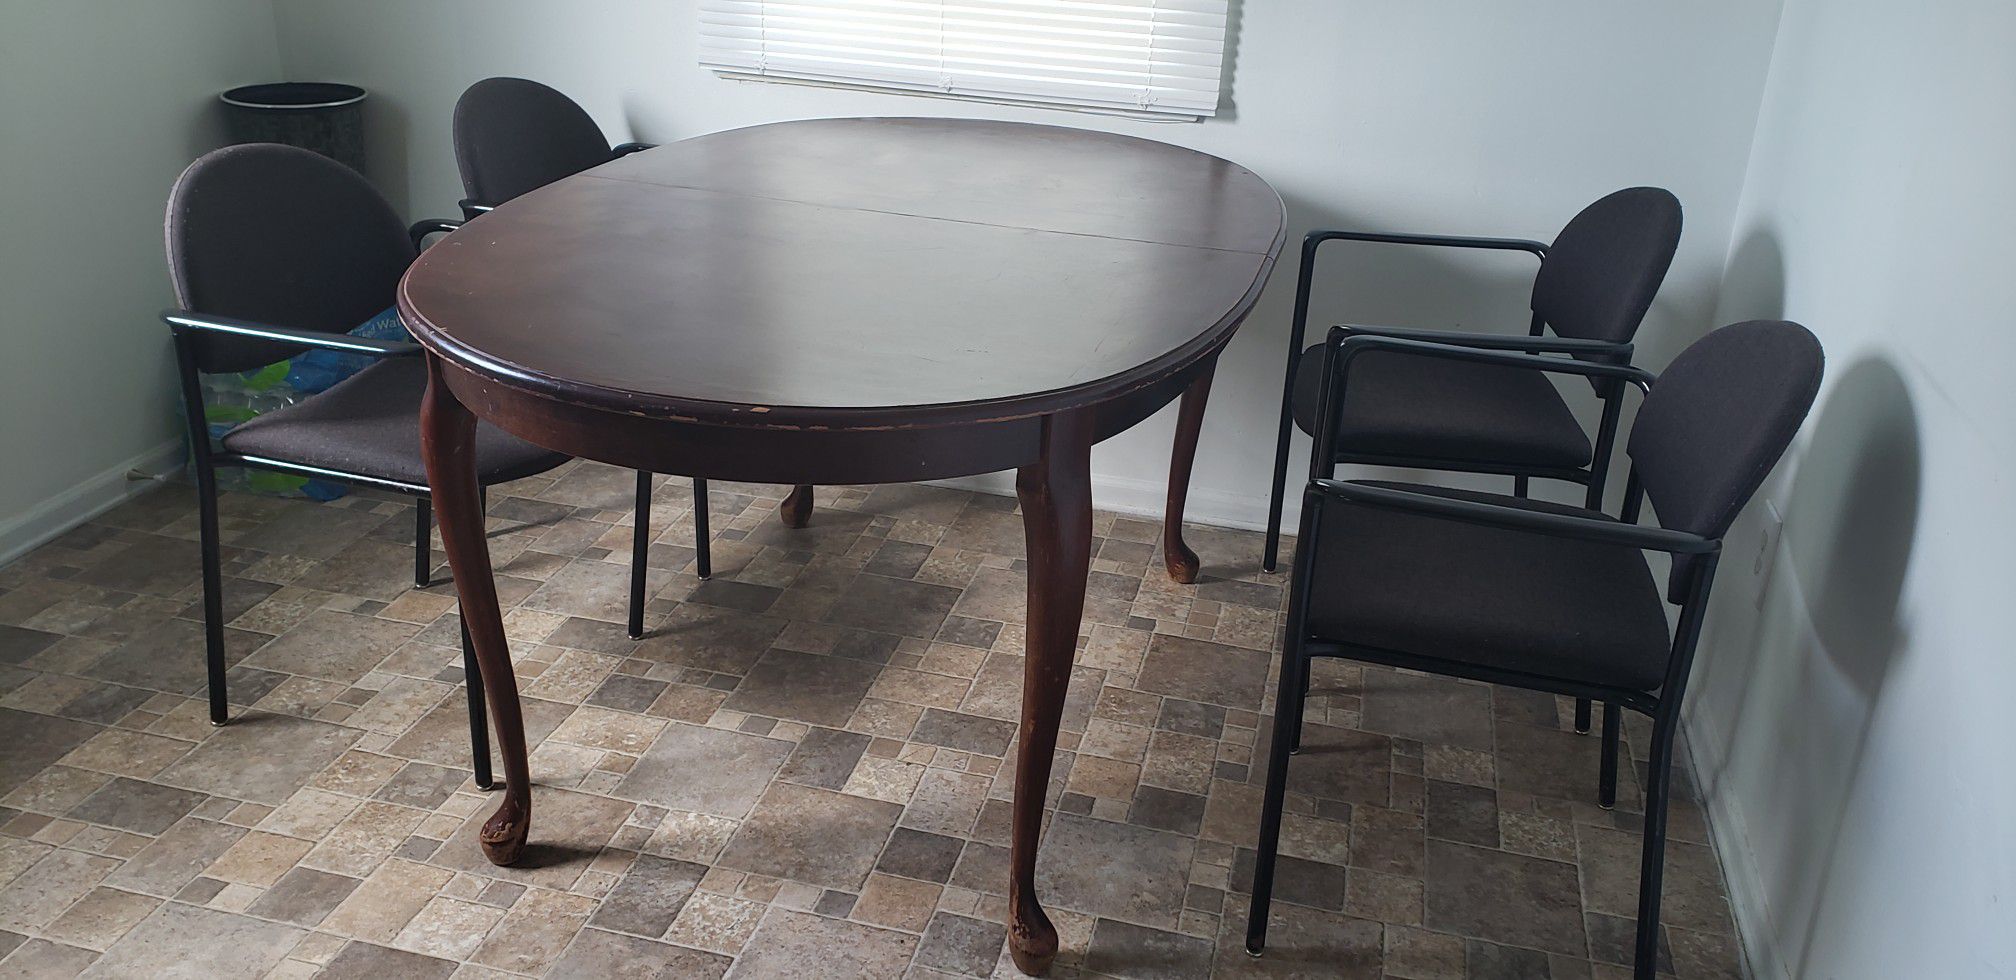 Clean dining table with chairs